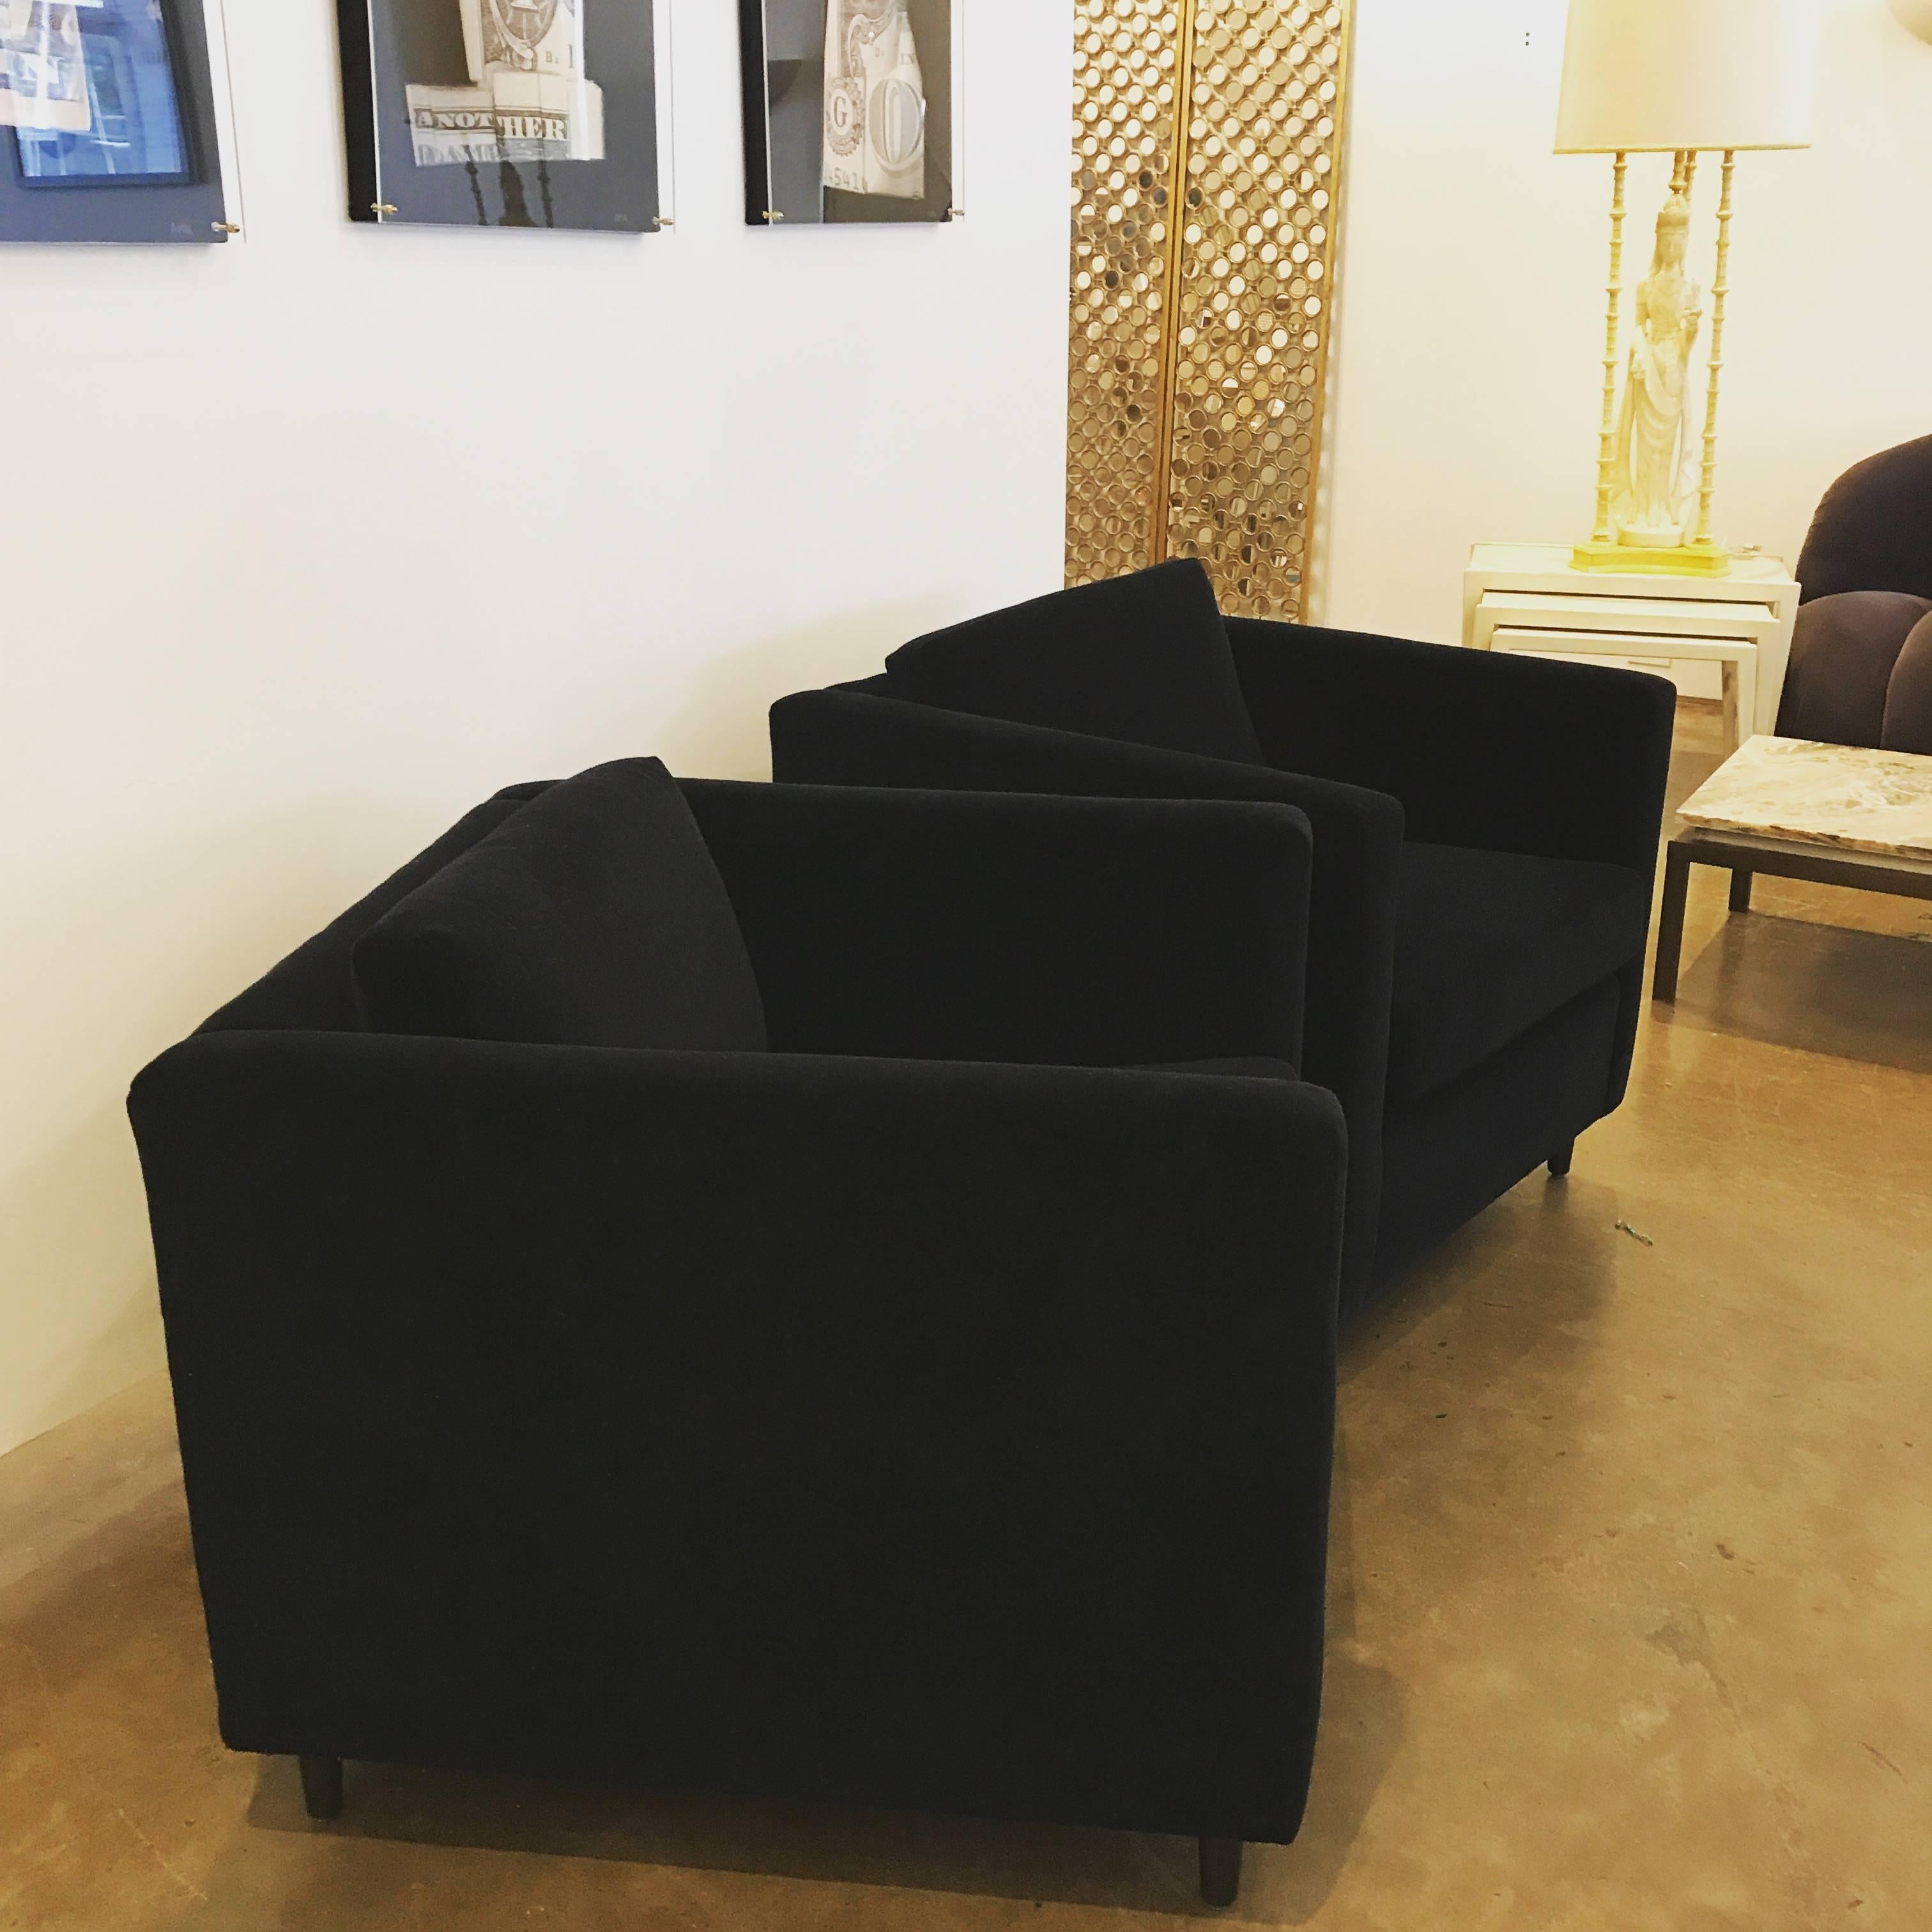 Offered are Mid-Century Modern newly upholstered Harvey Probber style "tuxedo" pair of club chairs in a black cotton velvet with ebony stained wood legs. The style and comfort of this pair are on point and would look great with just about